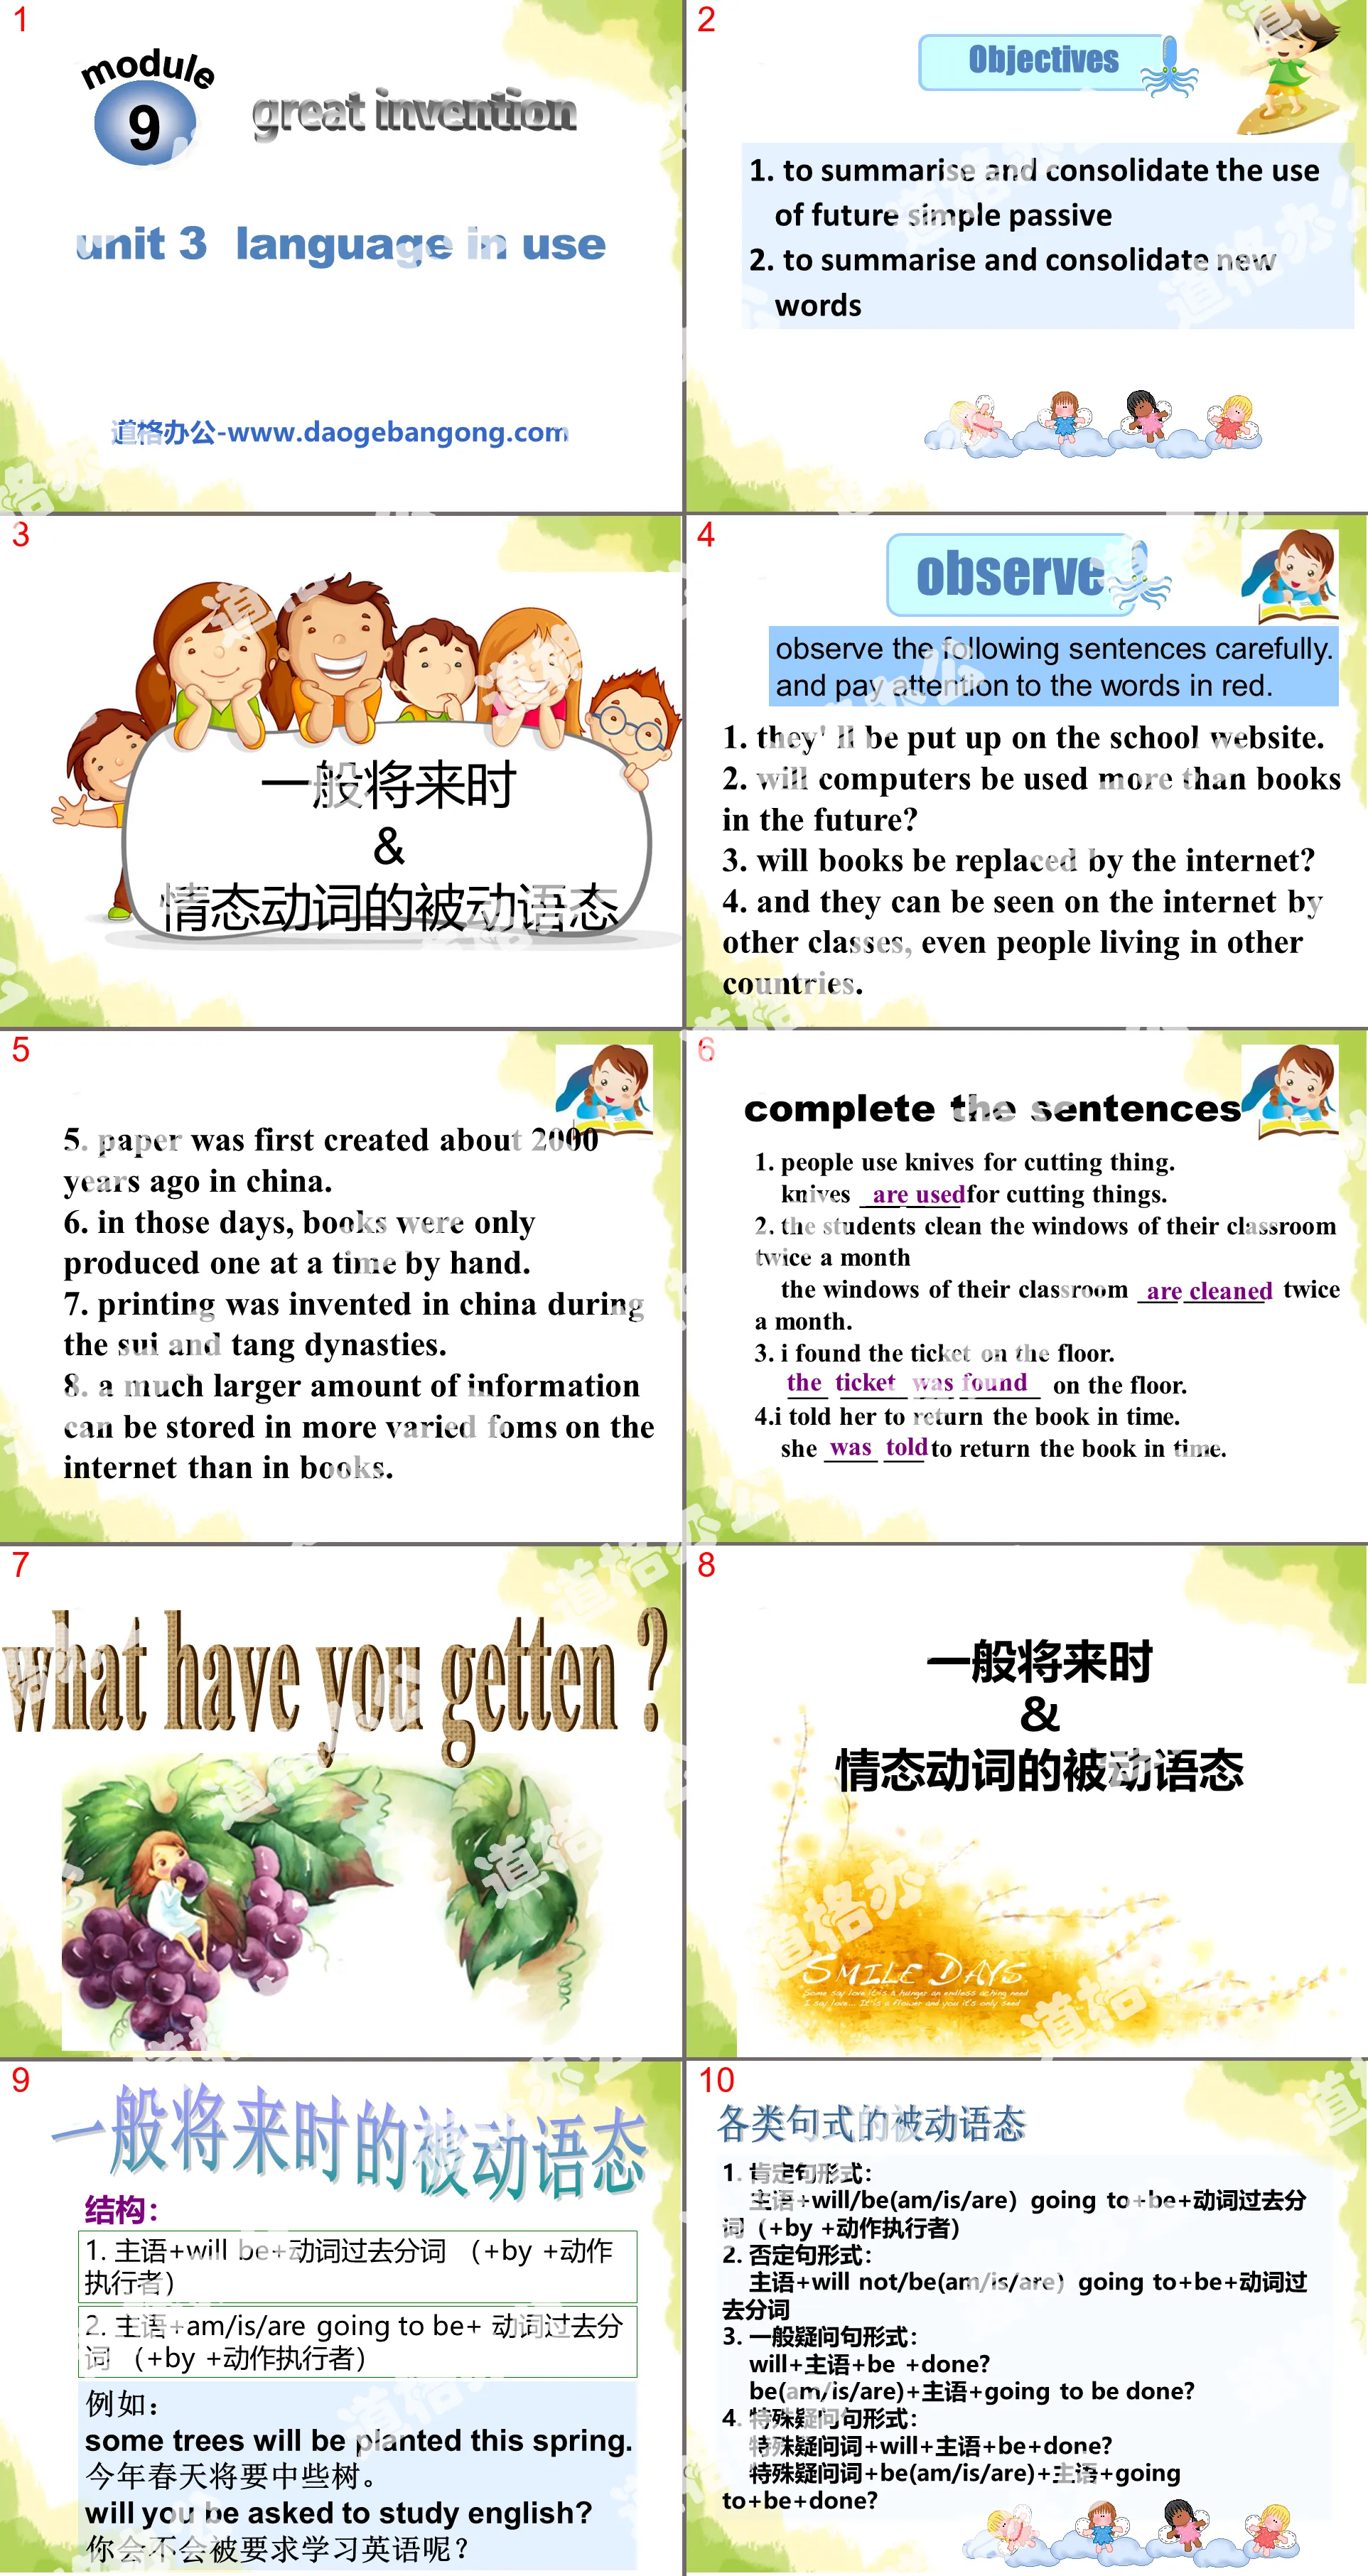 《Language in use》Great inventions PPT课件3
